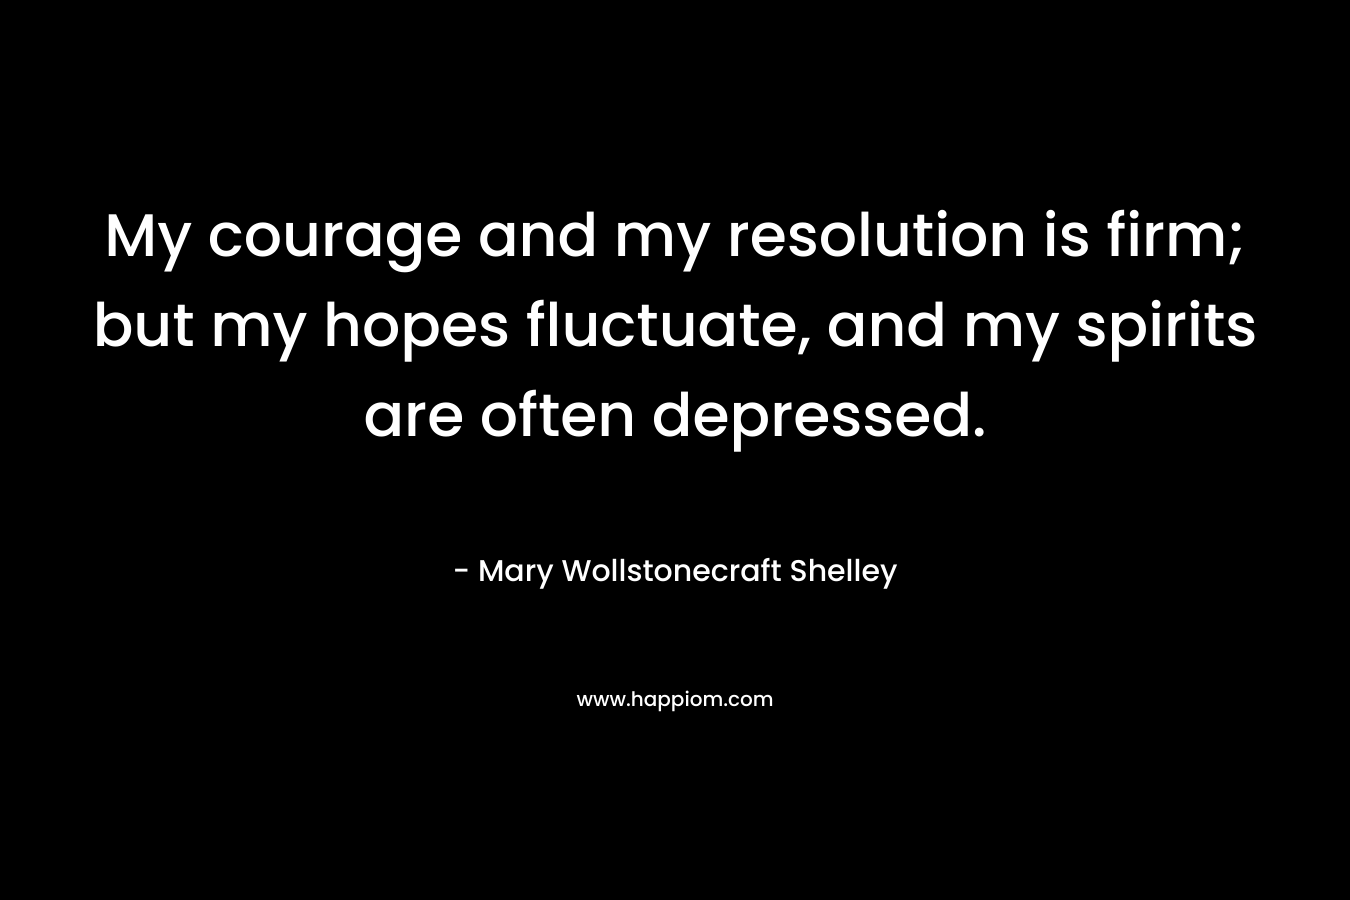 My courage and my resolution is firm; but my hopes fluctuate, and my spirits are often depressed.